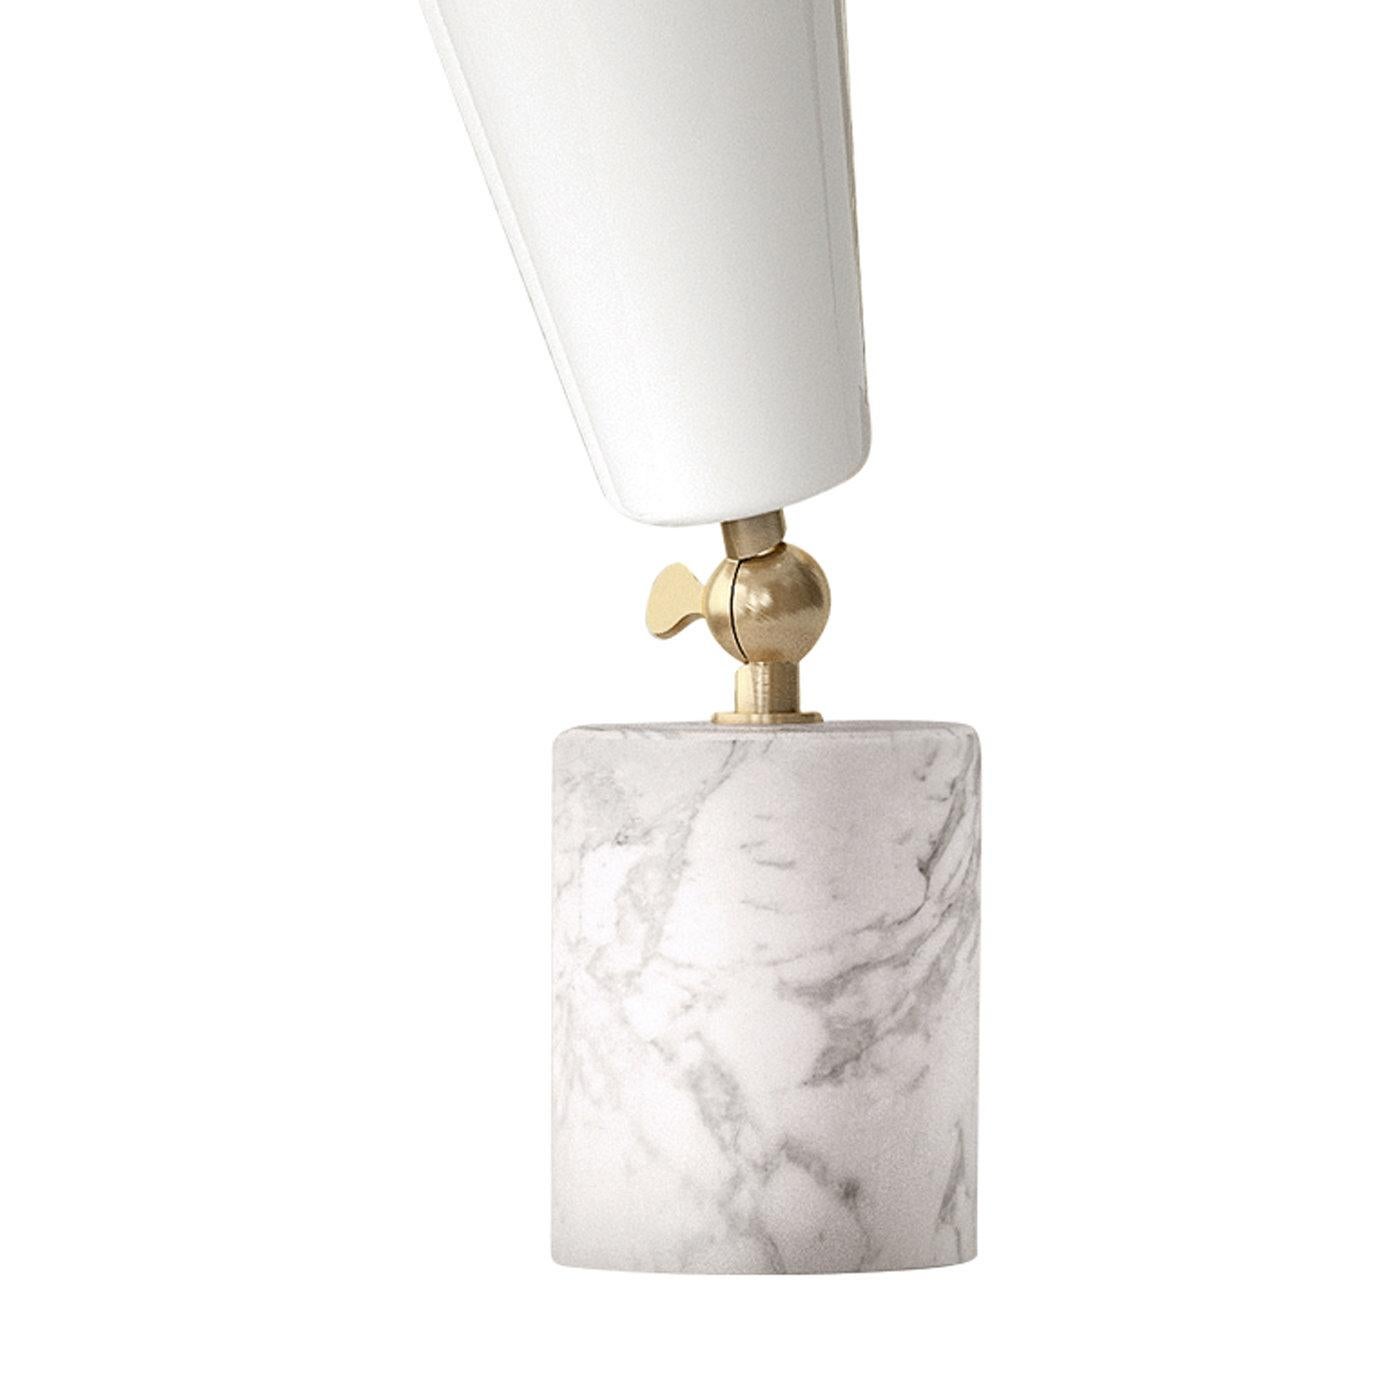 US 110v table lamp with white Carrara marble base, satin brass metal parts and adjustable glossy white diffuser, available from showroom display. 
Measures: 5